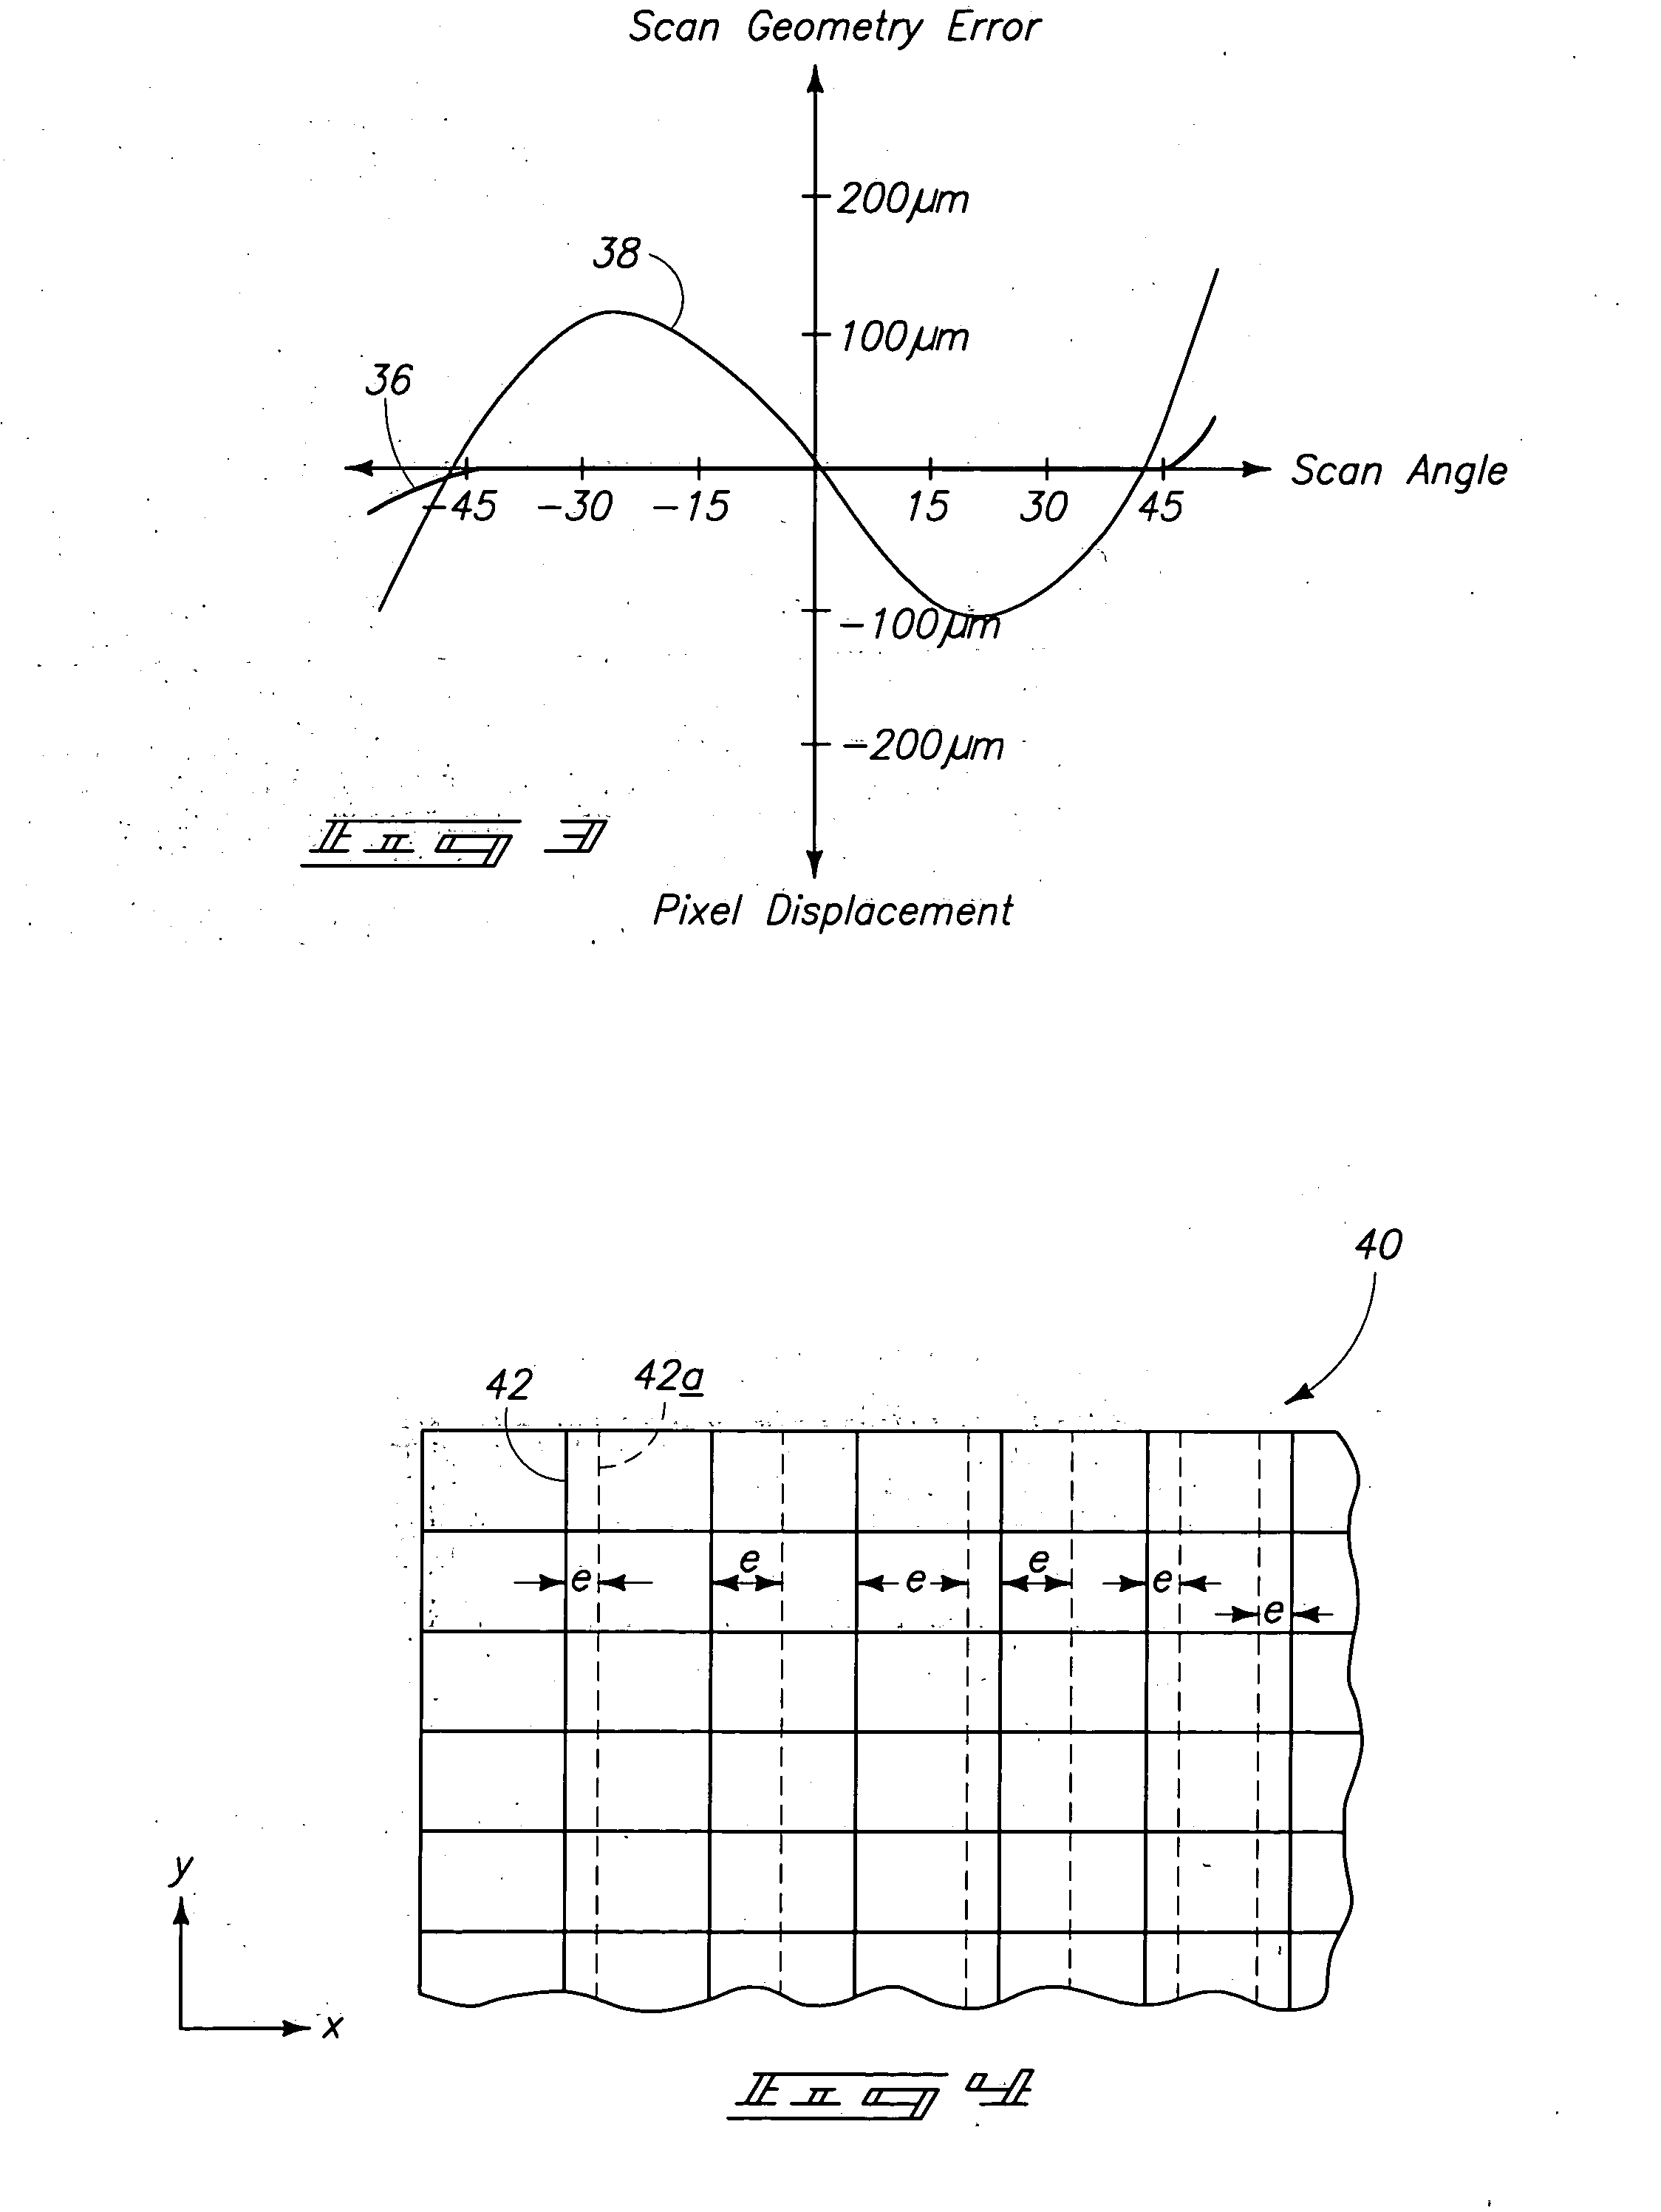 Hard imaging methods, hard imaging device fabrication methods, hard imaging devices, hard imaging device optical scanning systems, and articles of manufacture